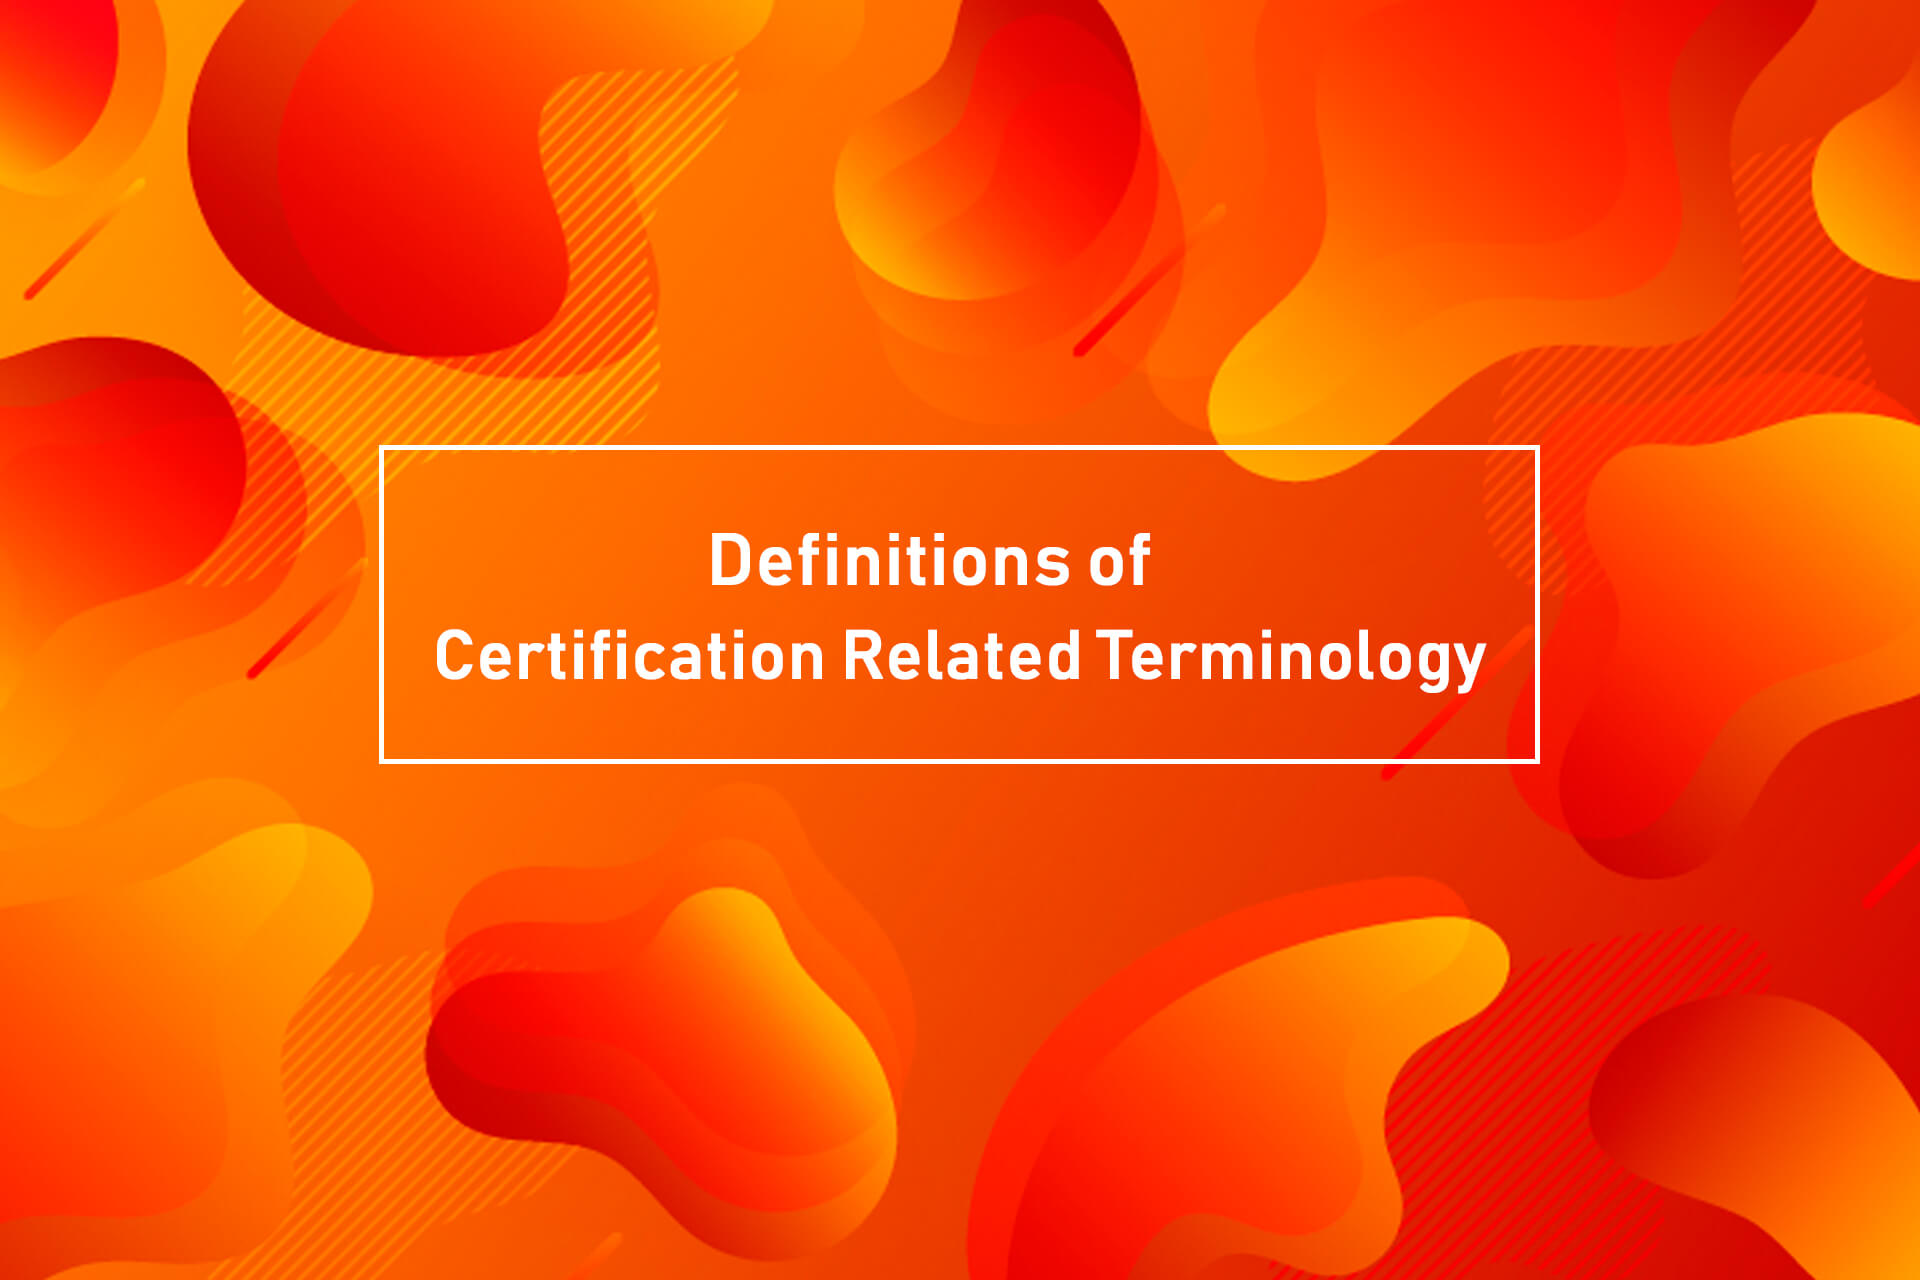 Certification Related Terminology